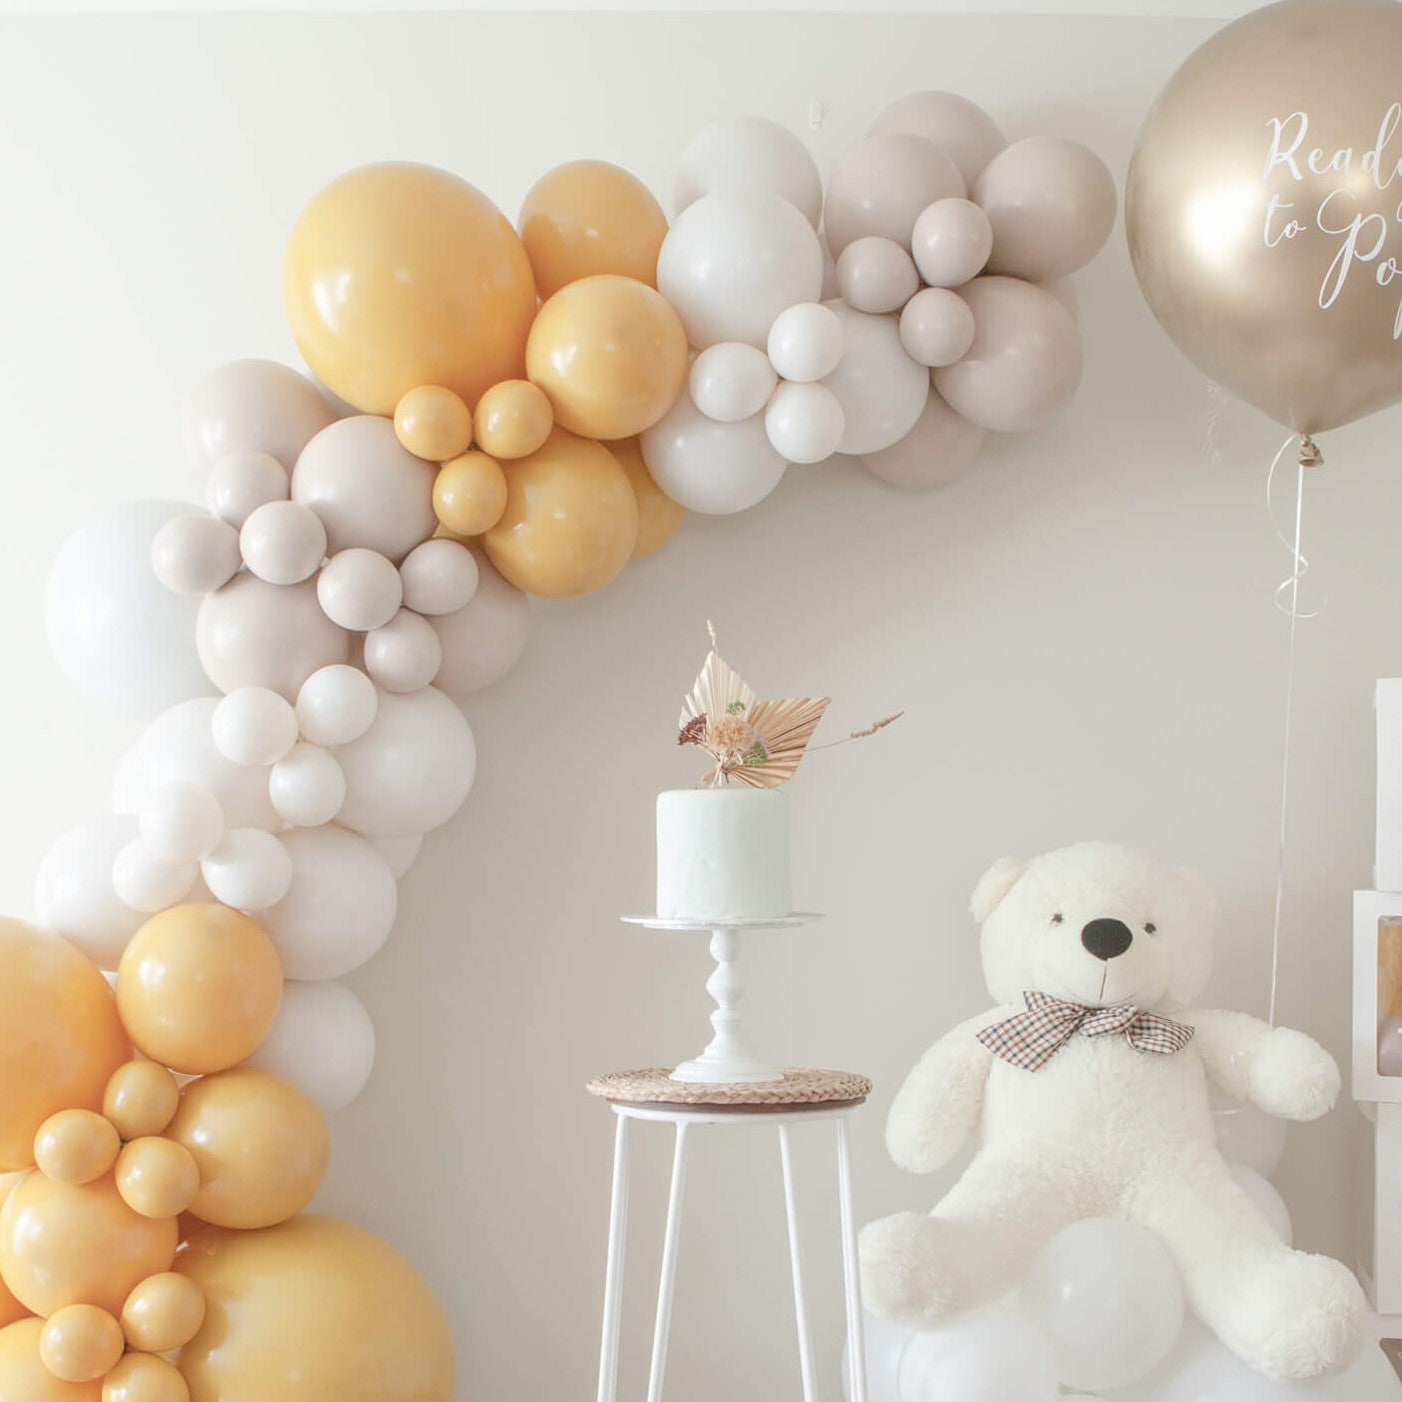 My Party Box We Can't Bearly Wait Gender Reveal Balloon Garland DIY Kit - Mustard with solid mustard, sand chalk and teddy sand latex balloons